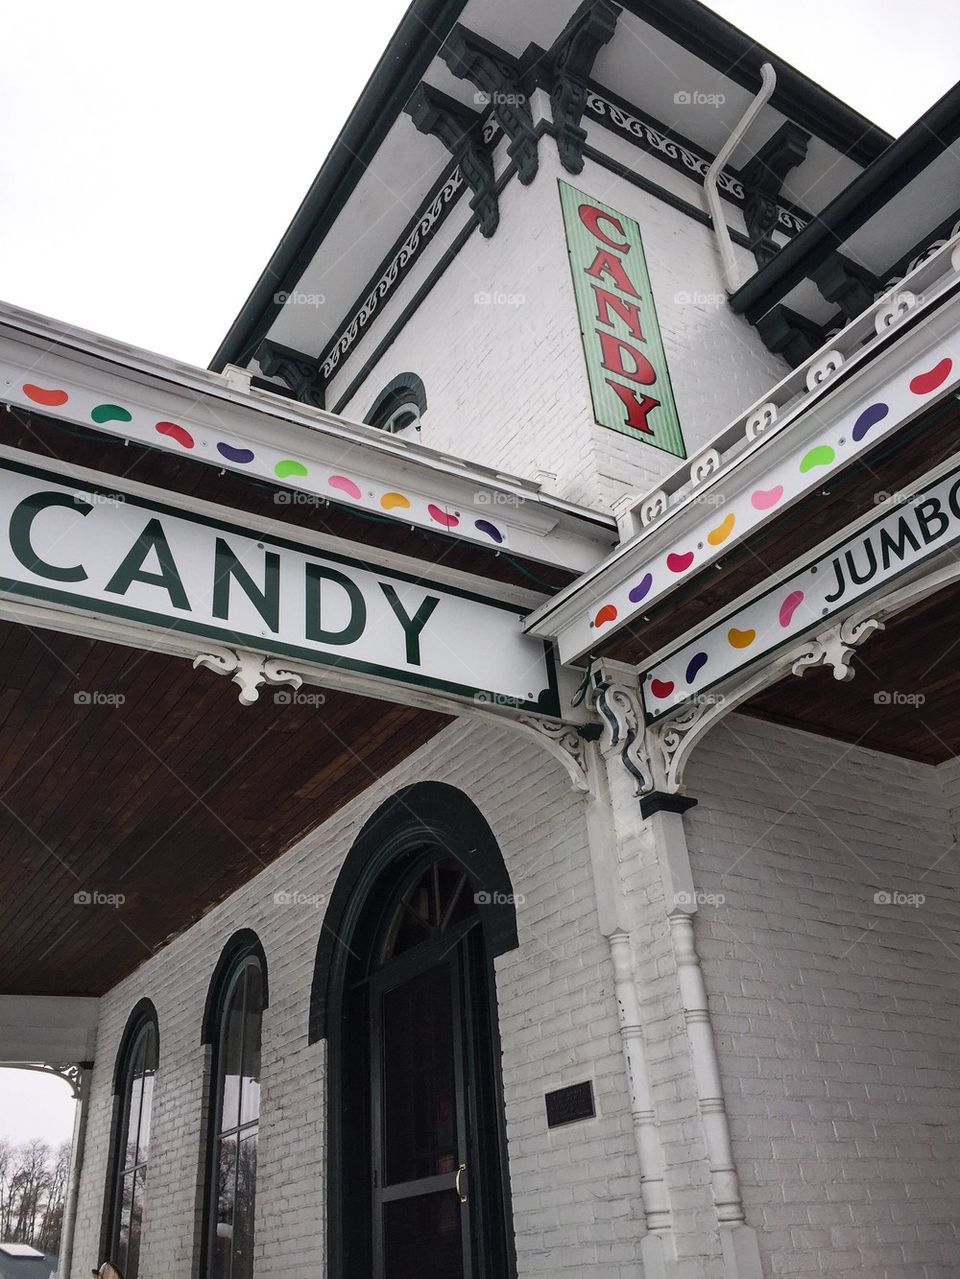 Meeting Point at the Candy House